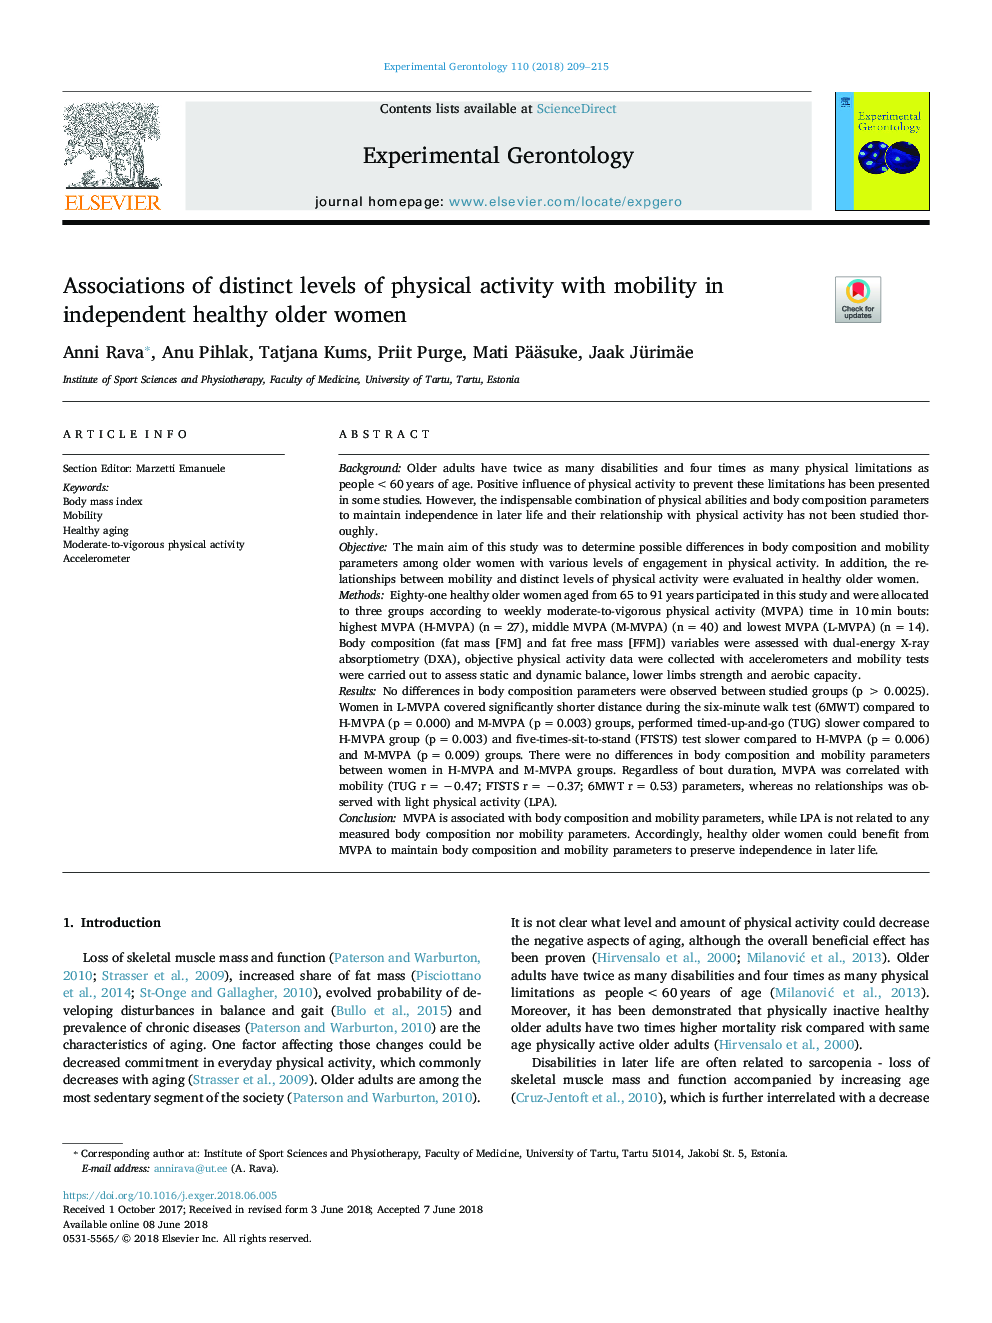 Associations of distinct levels of physical activity with mobility in independent healthy older women